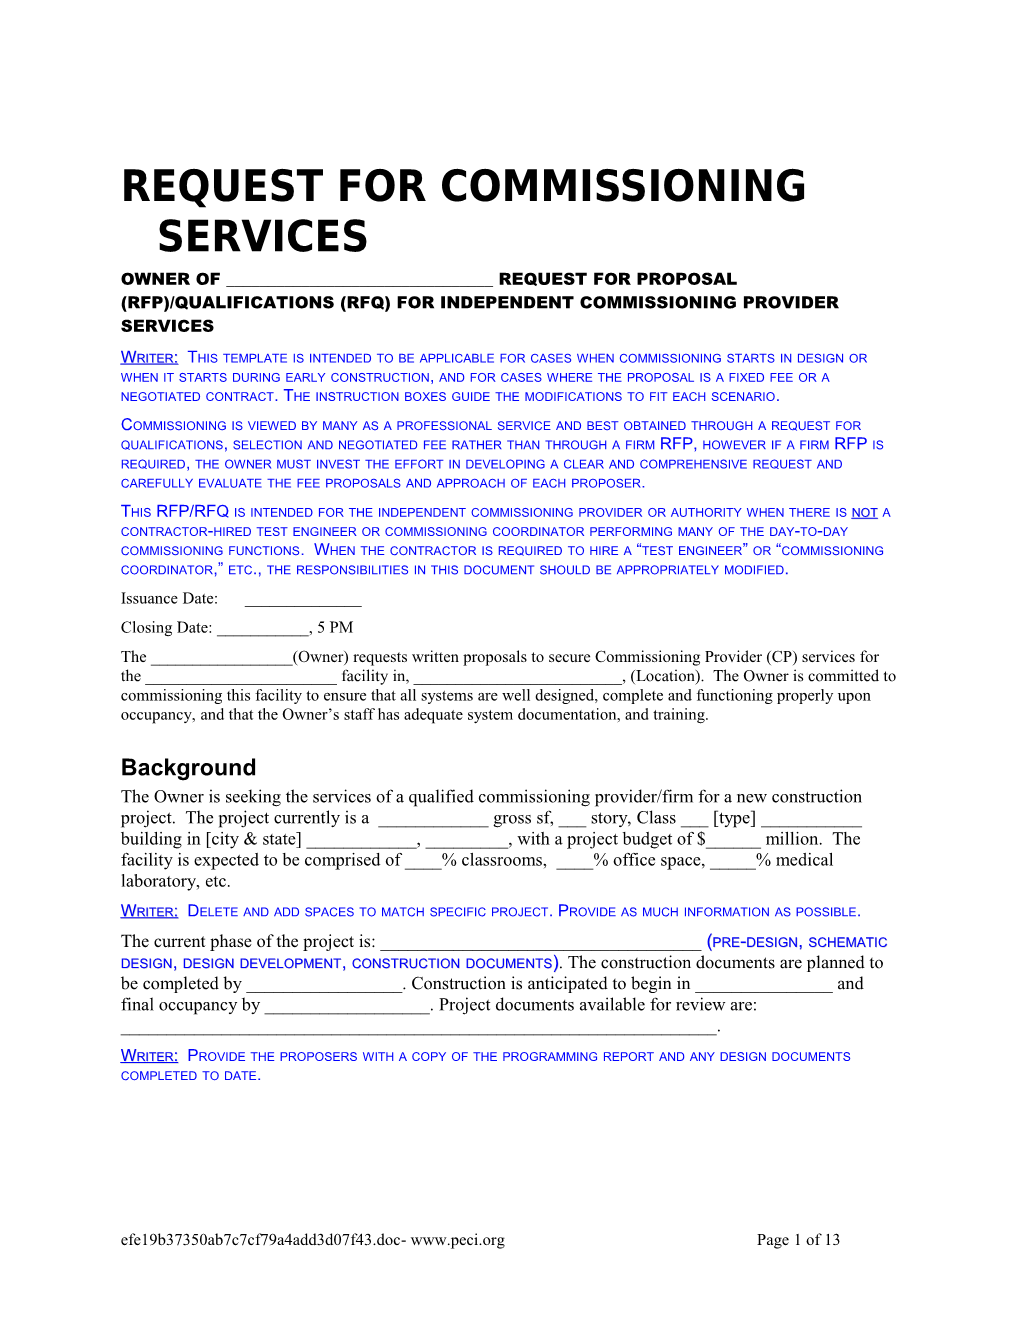 Request for Commissioning Services